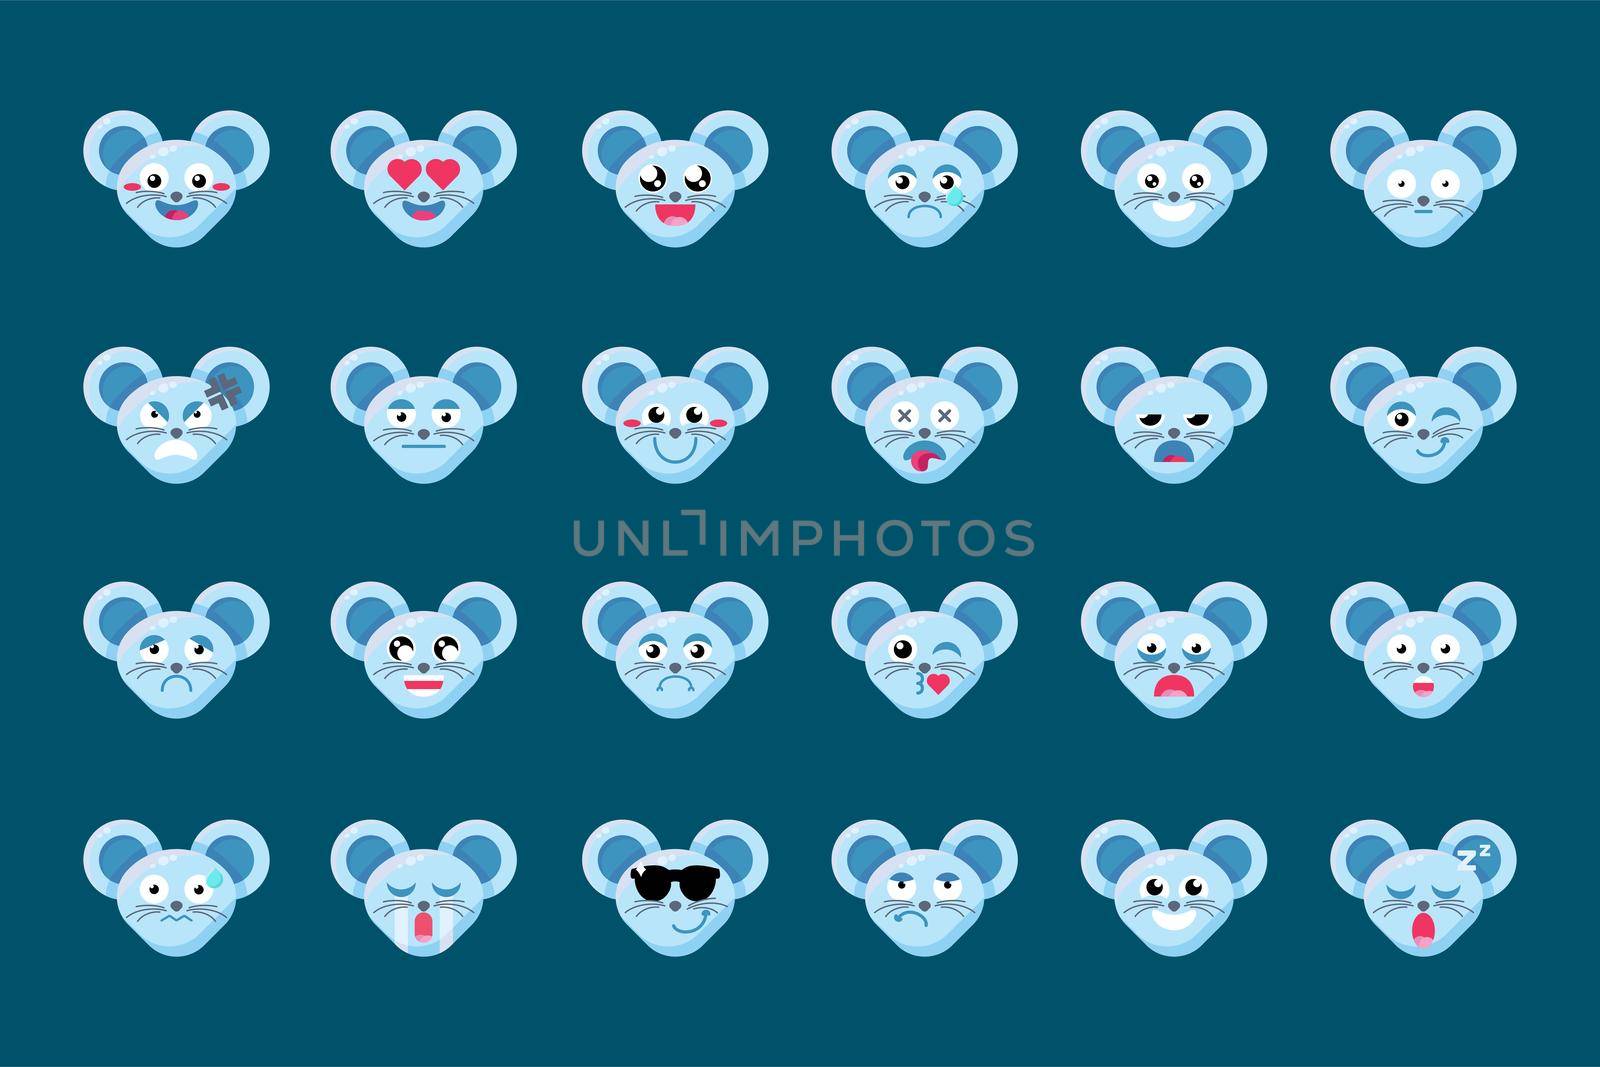 Emoji Fun Cute Animal Mouse Smile Emotions Set. Colorful Collection Face Feelings Happy and Inlove, Confused and Dizzy, Blankface and Happyface. Emoticon Vector Flat Cartoon Illustrations